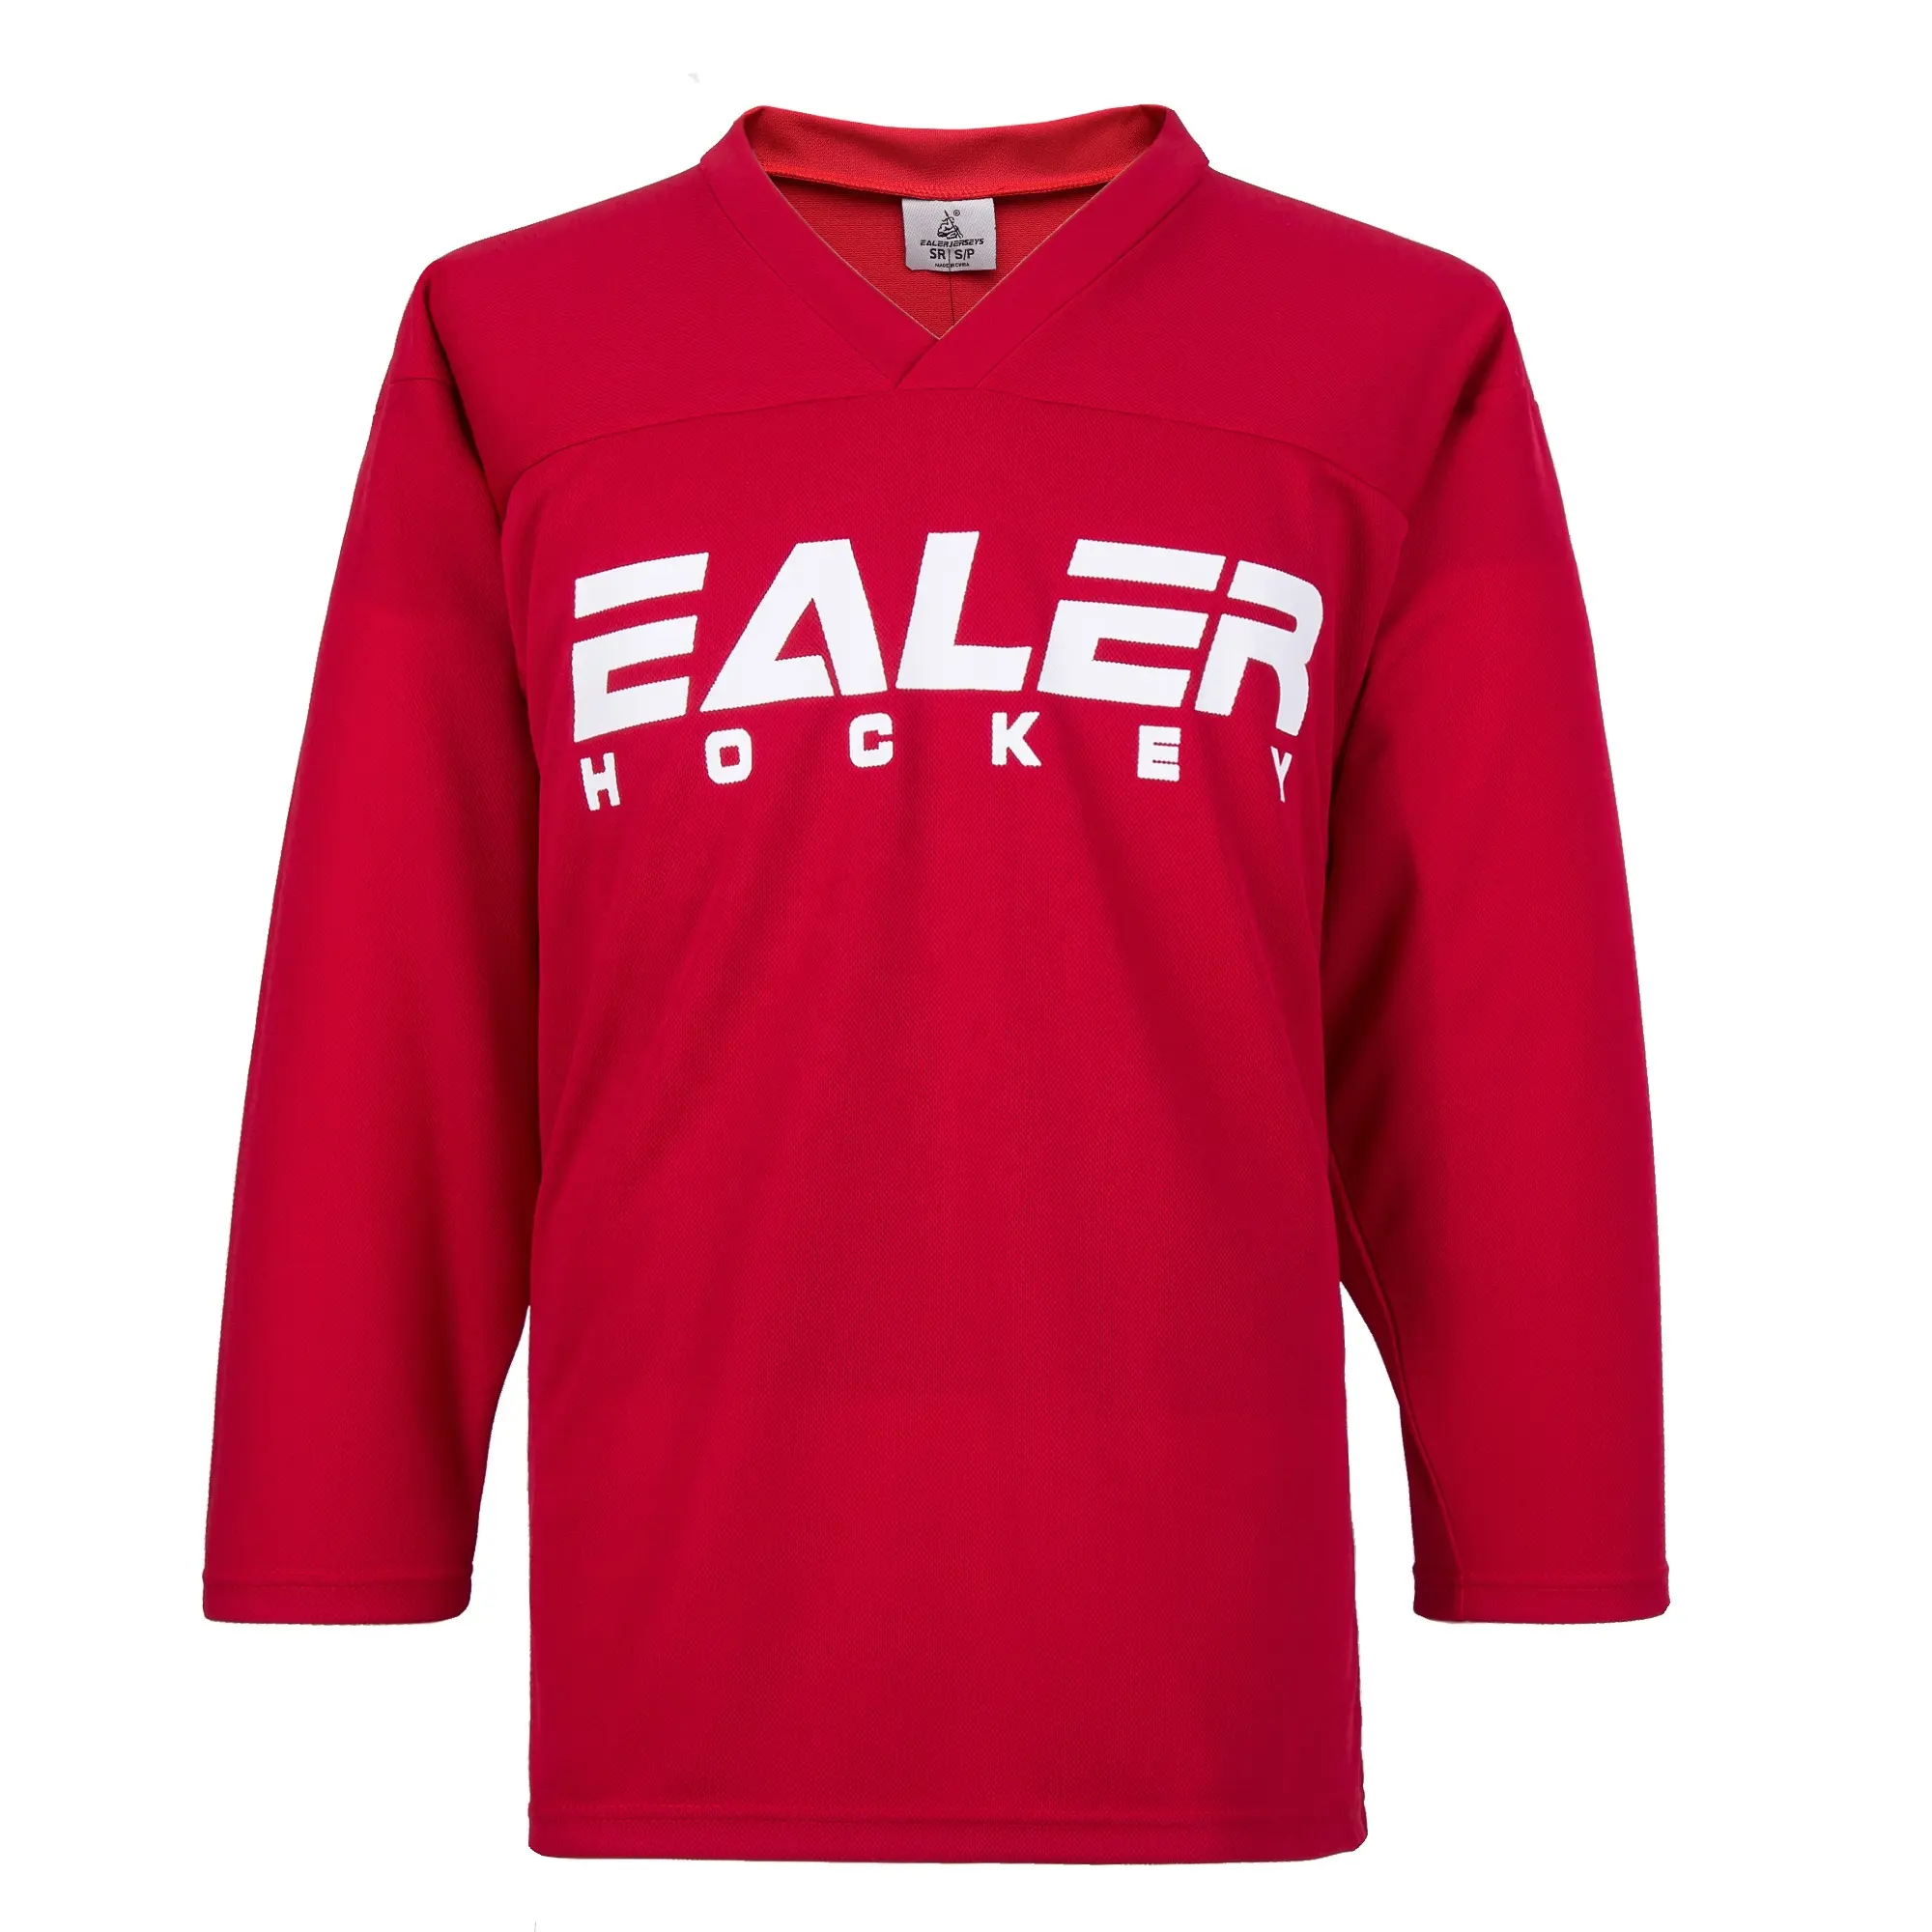 Hockey Practice Jerseys EALER Whosale 100% Polyester Practice Hockey Jersey For Training With 5 Colors